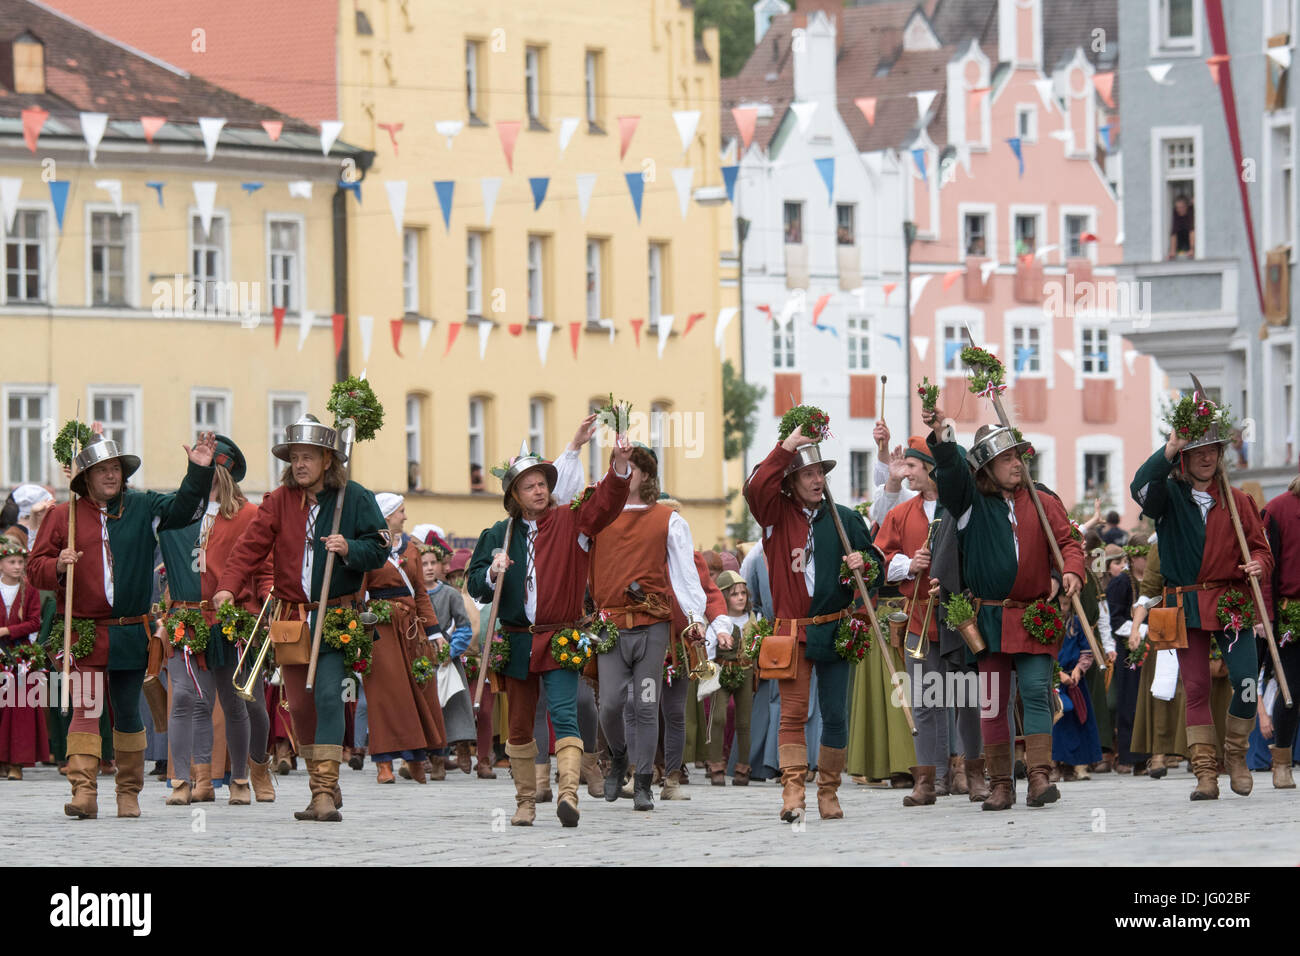 Landshut, Germany. 2nd July, 2017. People in historical costumes, photographed at the parade of the Landshut Wedding (German: 'Landshuter Hochzeit') in the old town of Landshut, Germany, 2 July 2017. The citizens of the Lower Bavarian regional capital reenact the wedding ceremony of the the son of the Duke of Bavaria, George, and the Polish King's daughter Hedwig in 1475. Photo: Armin Weigel/dpa/Alamy Live News Stock Photo